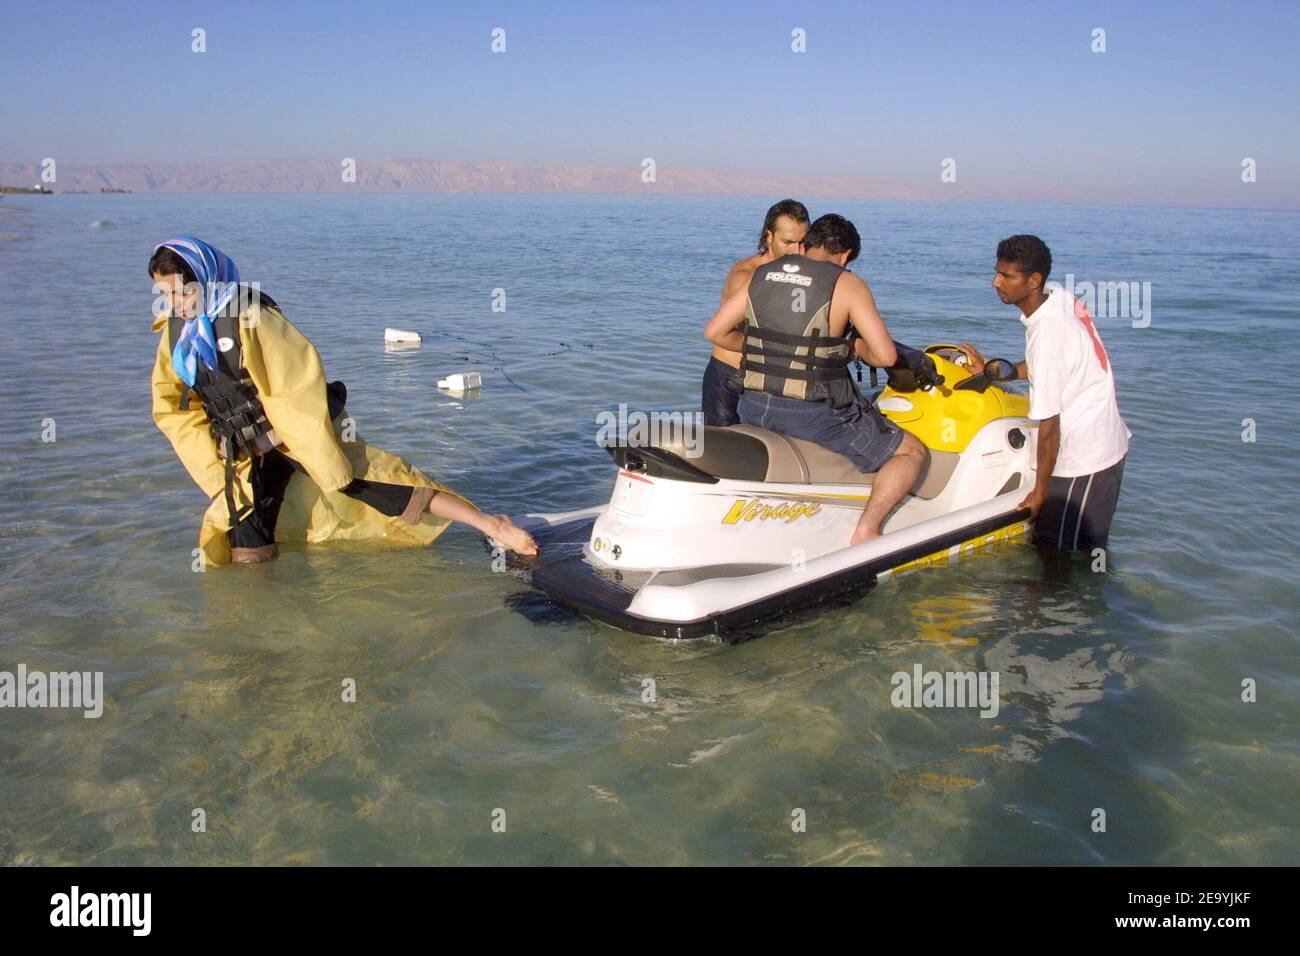 An Iranian couple riding a skidoo off Iran's island Kish, in the Persian Gulf, in April 2004. Photo by Orand-Viala/ABACA. Stock Photo